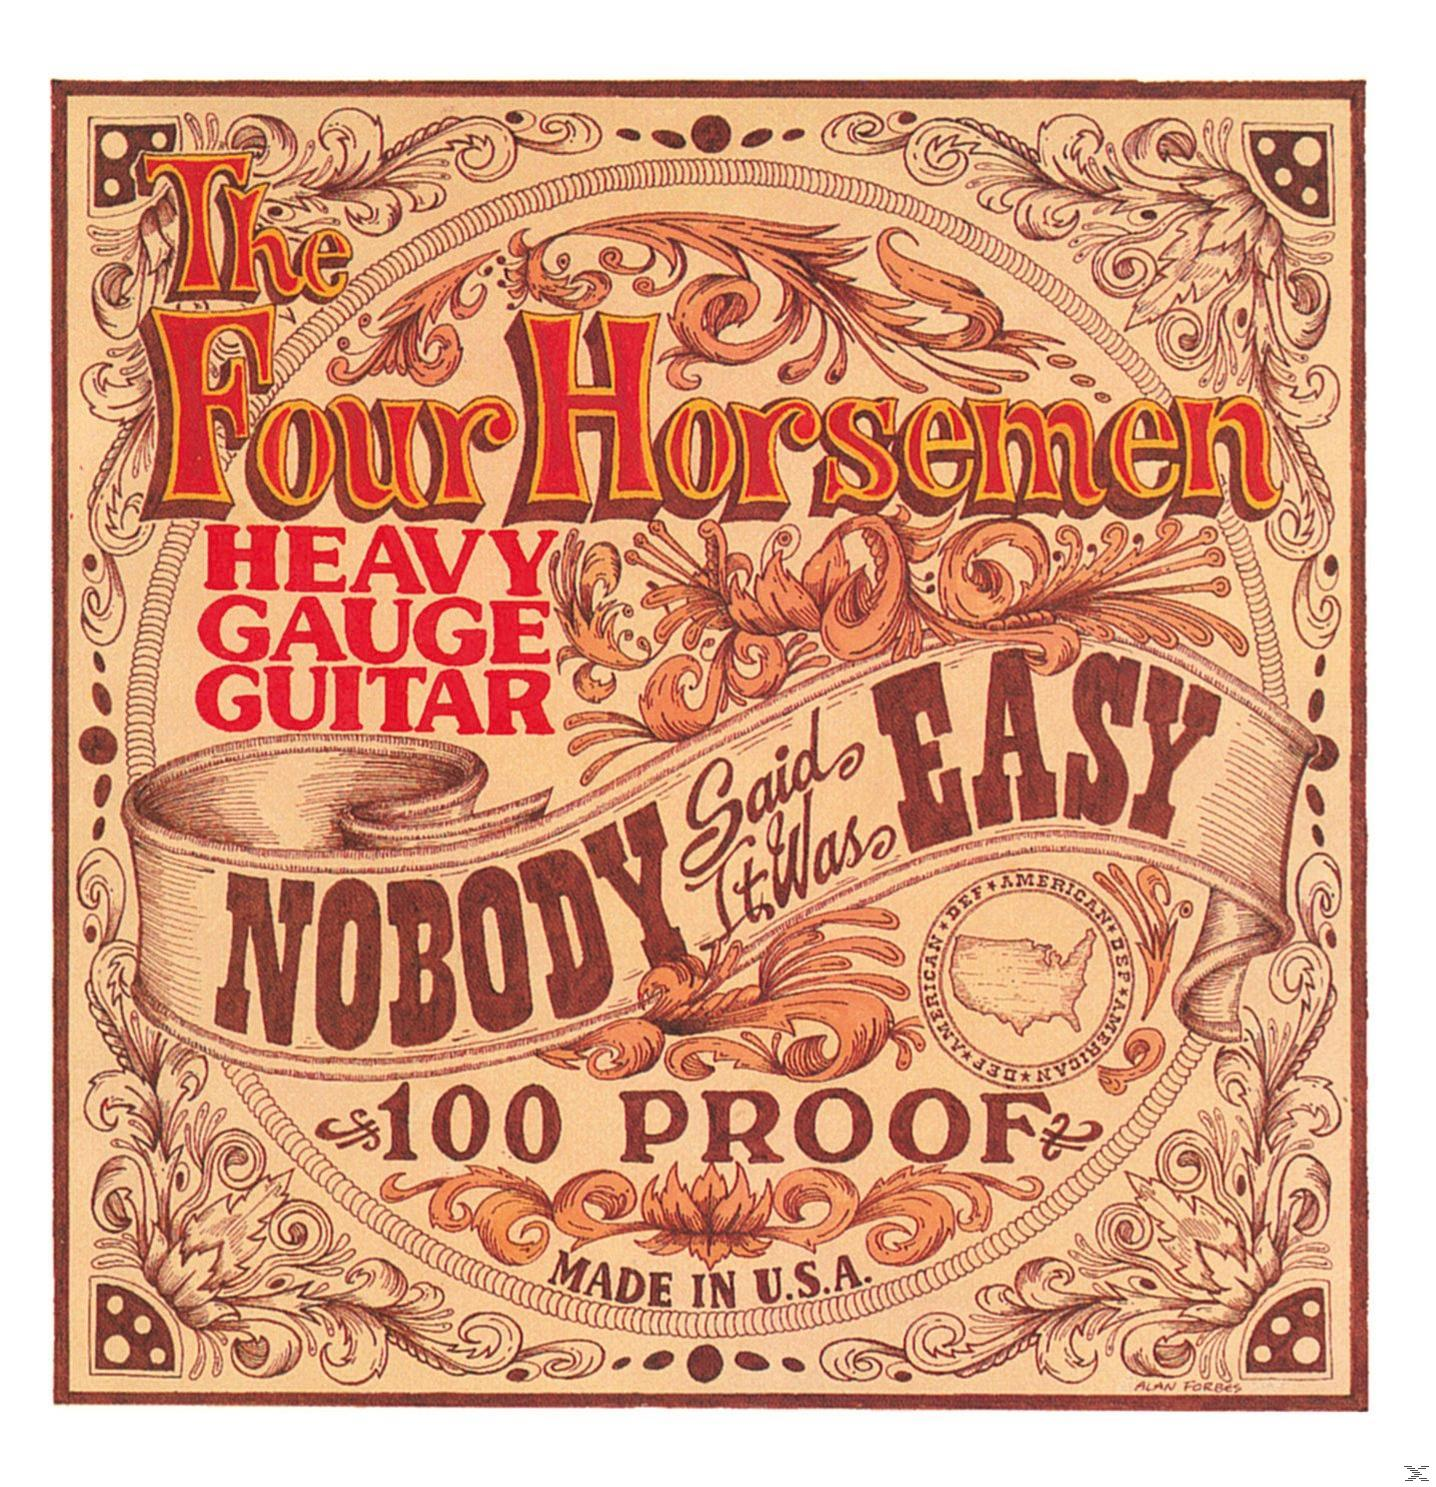 Four Nobody Horsemen Was - Easy Said - The (CD) It